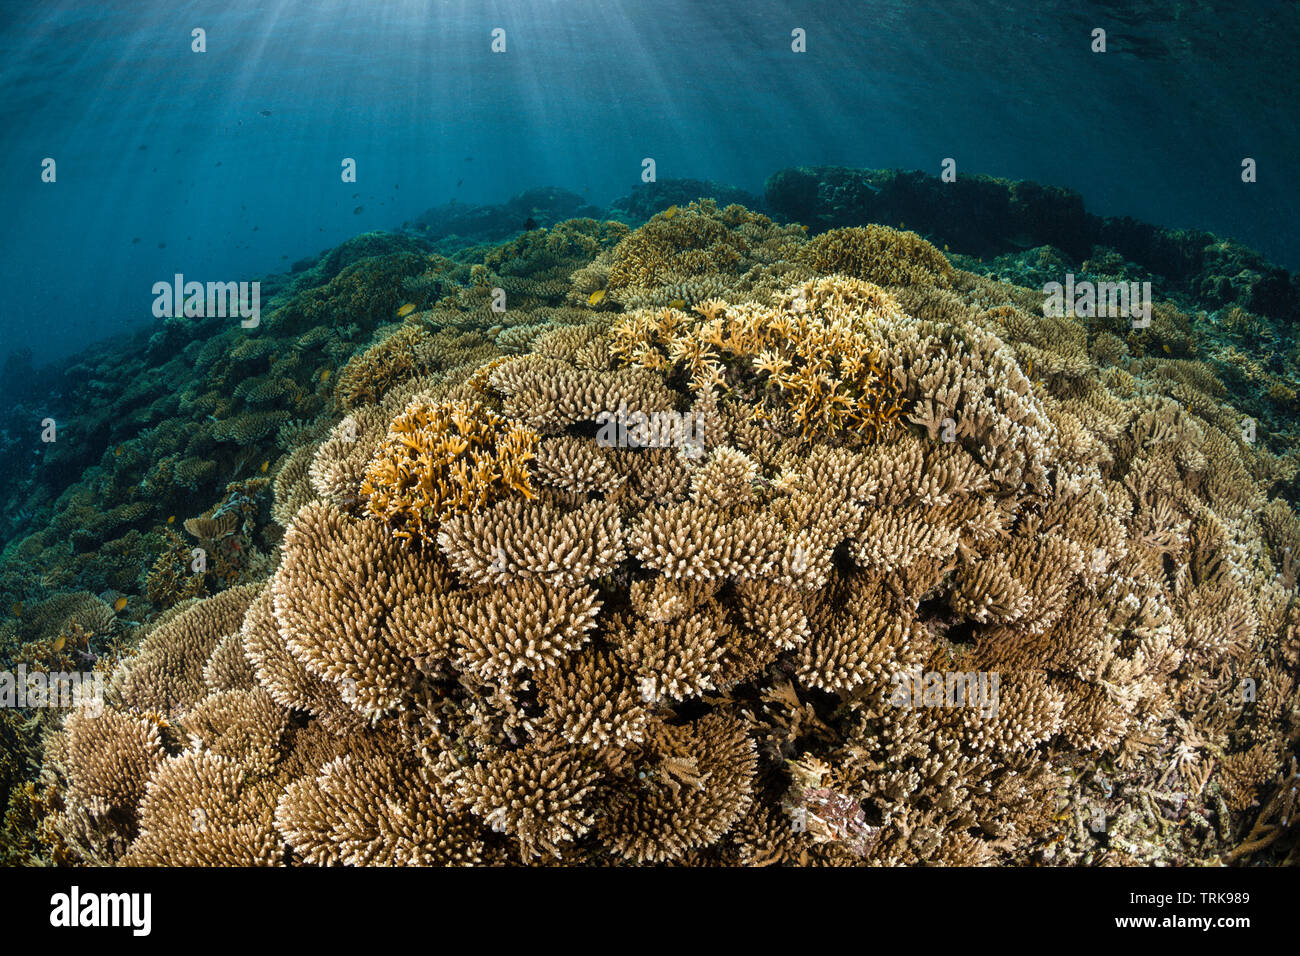 Healthy Hard Coral Reef, Acropora, Lissenung, New Ireland, Papua New Guinea Stock Photo